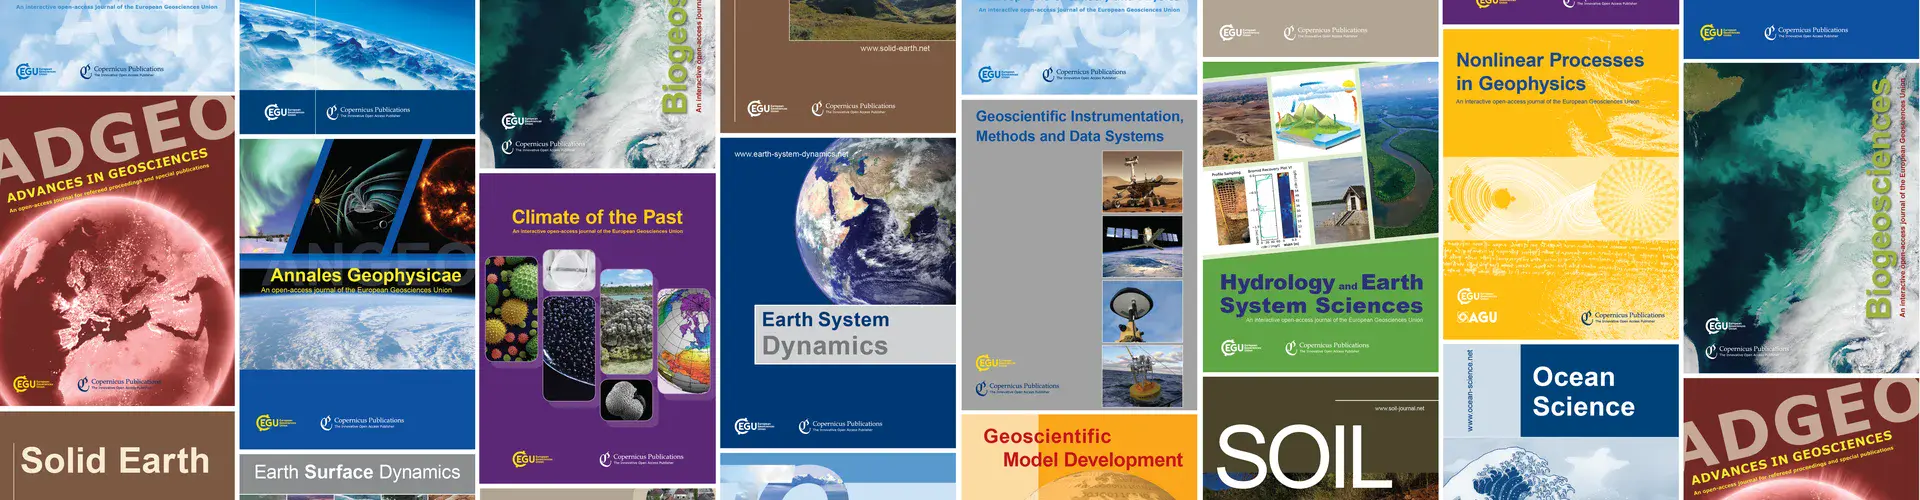 Covers of all 17 EGU journals published by Copernicus